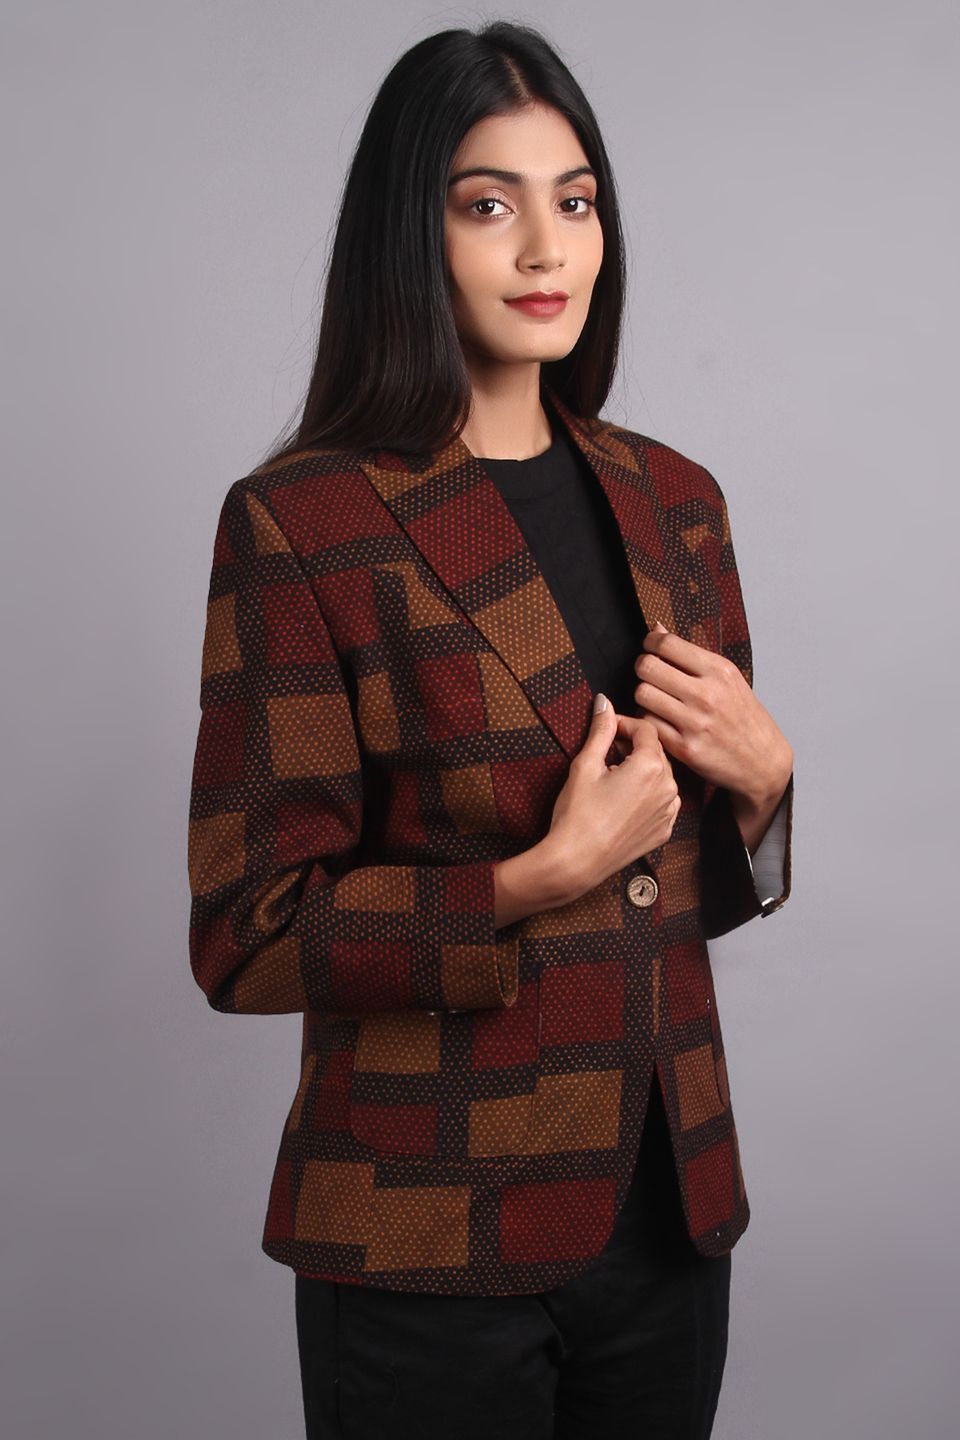 Vampire Brown Blazer Open front Outwear With Pockets For Women